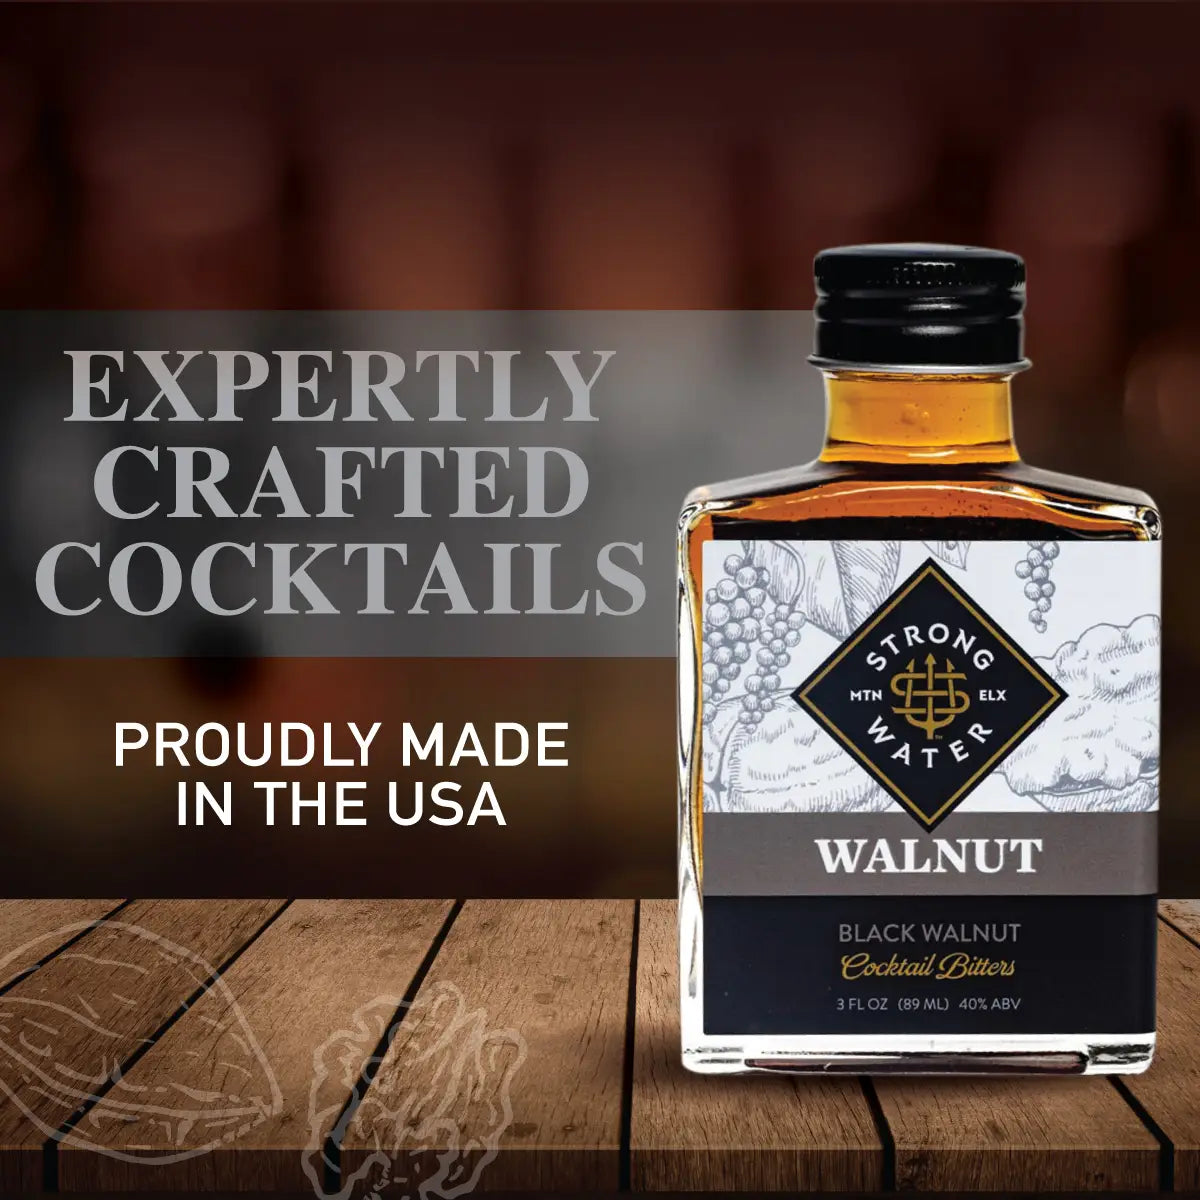 bottle of black walnut bitters on wood base and brown background, reads "Expertly Crafted Cocktails" Proudly Made in the USA